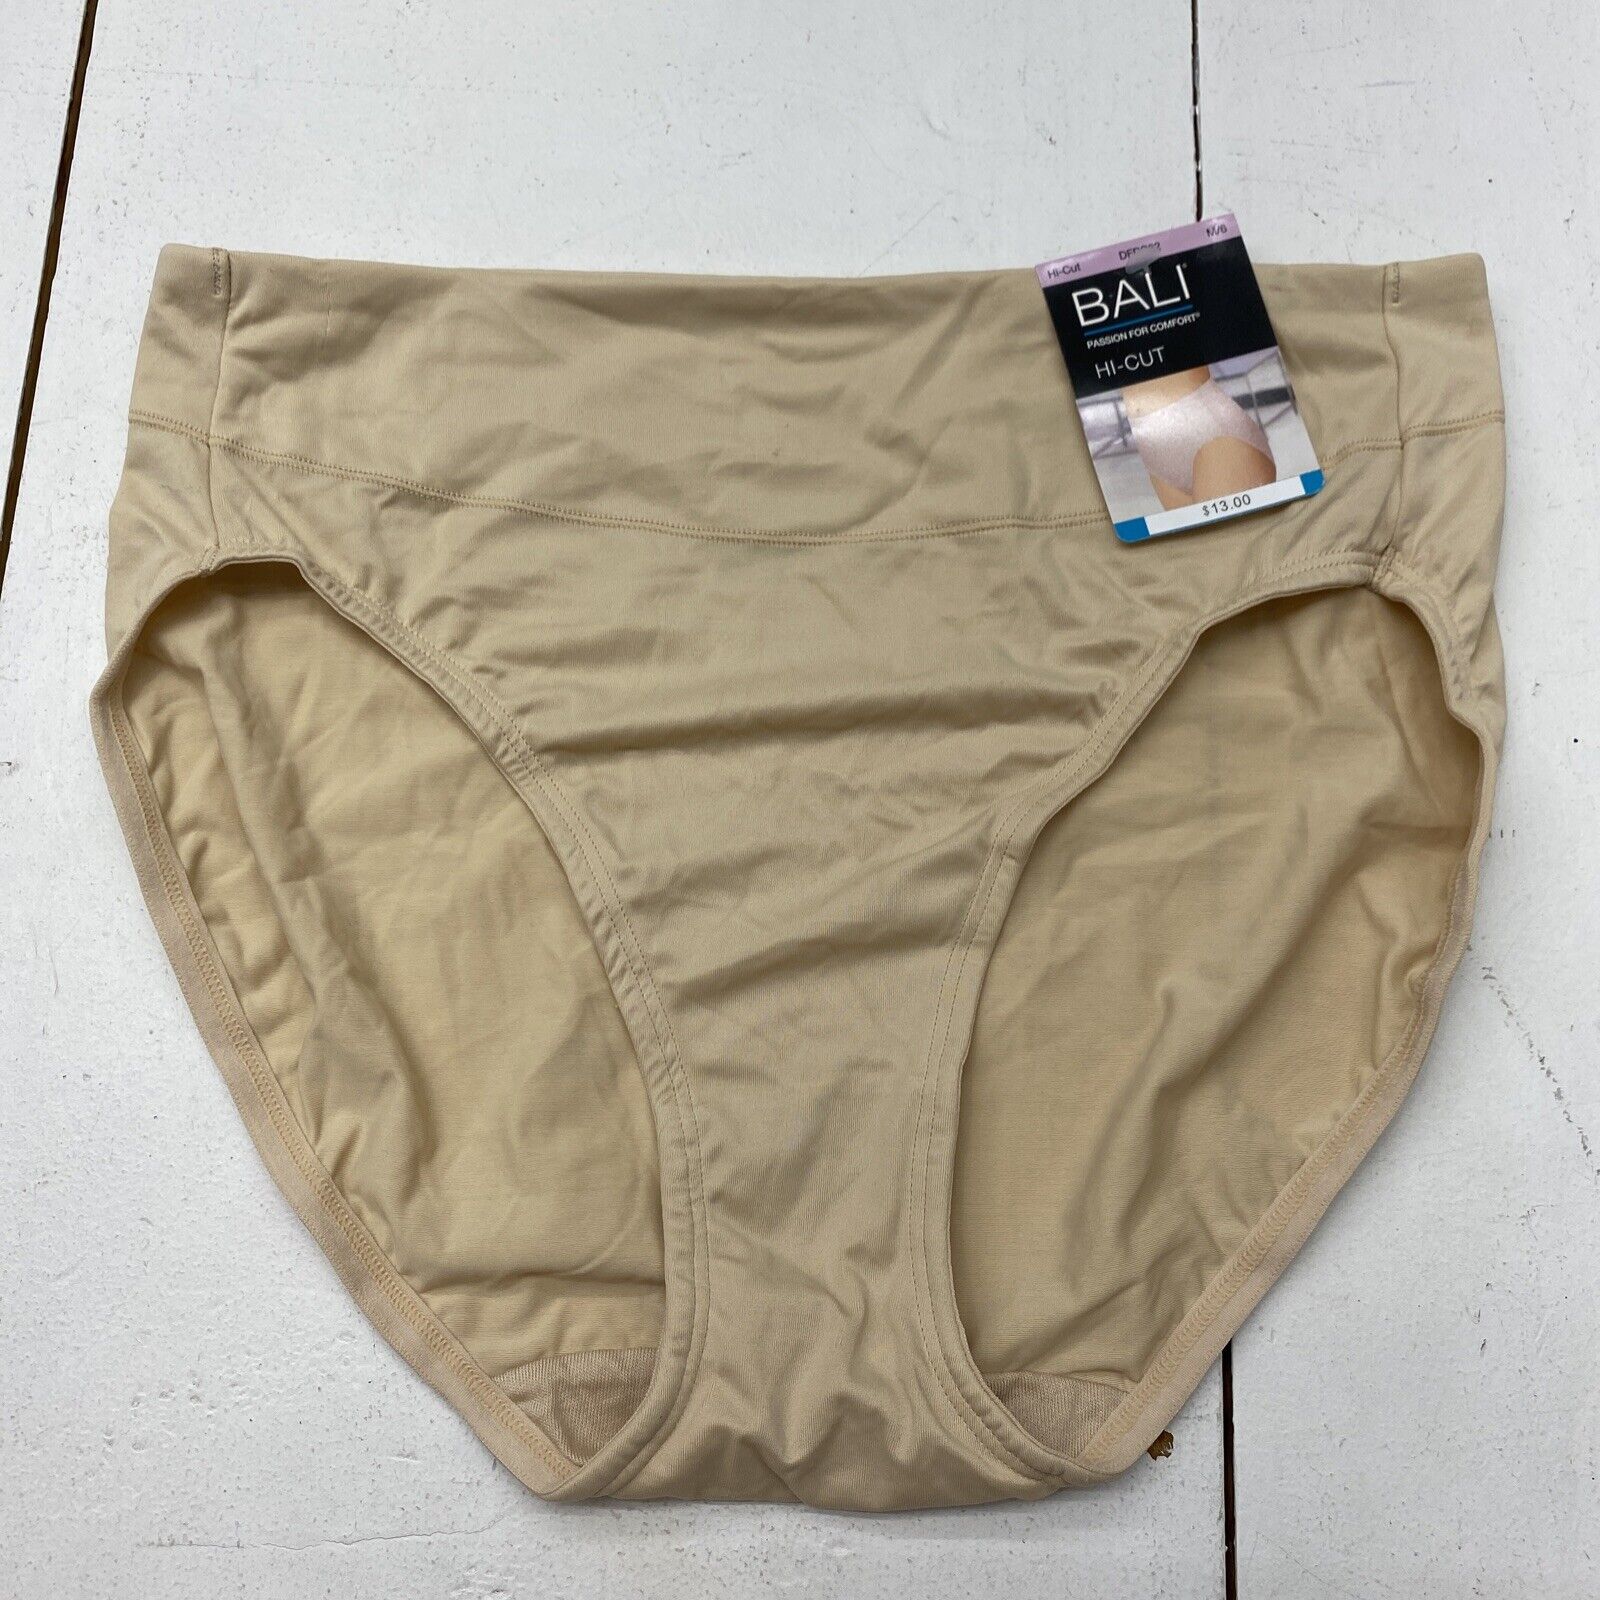 Bali Passion for Comfort Hi-Cut Panty Soft Taupe Womens Size M/6 New